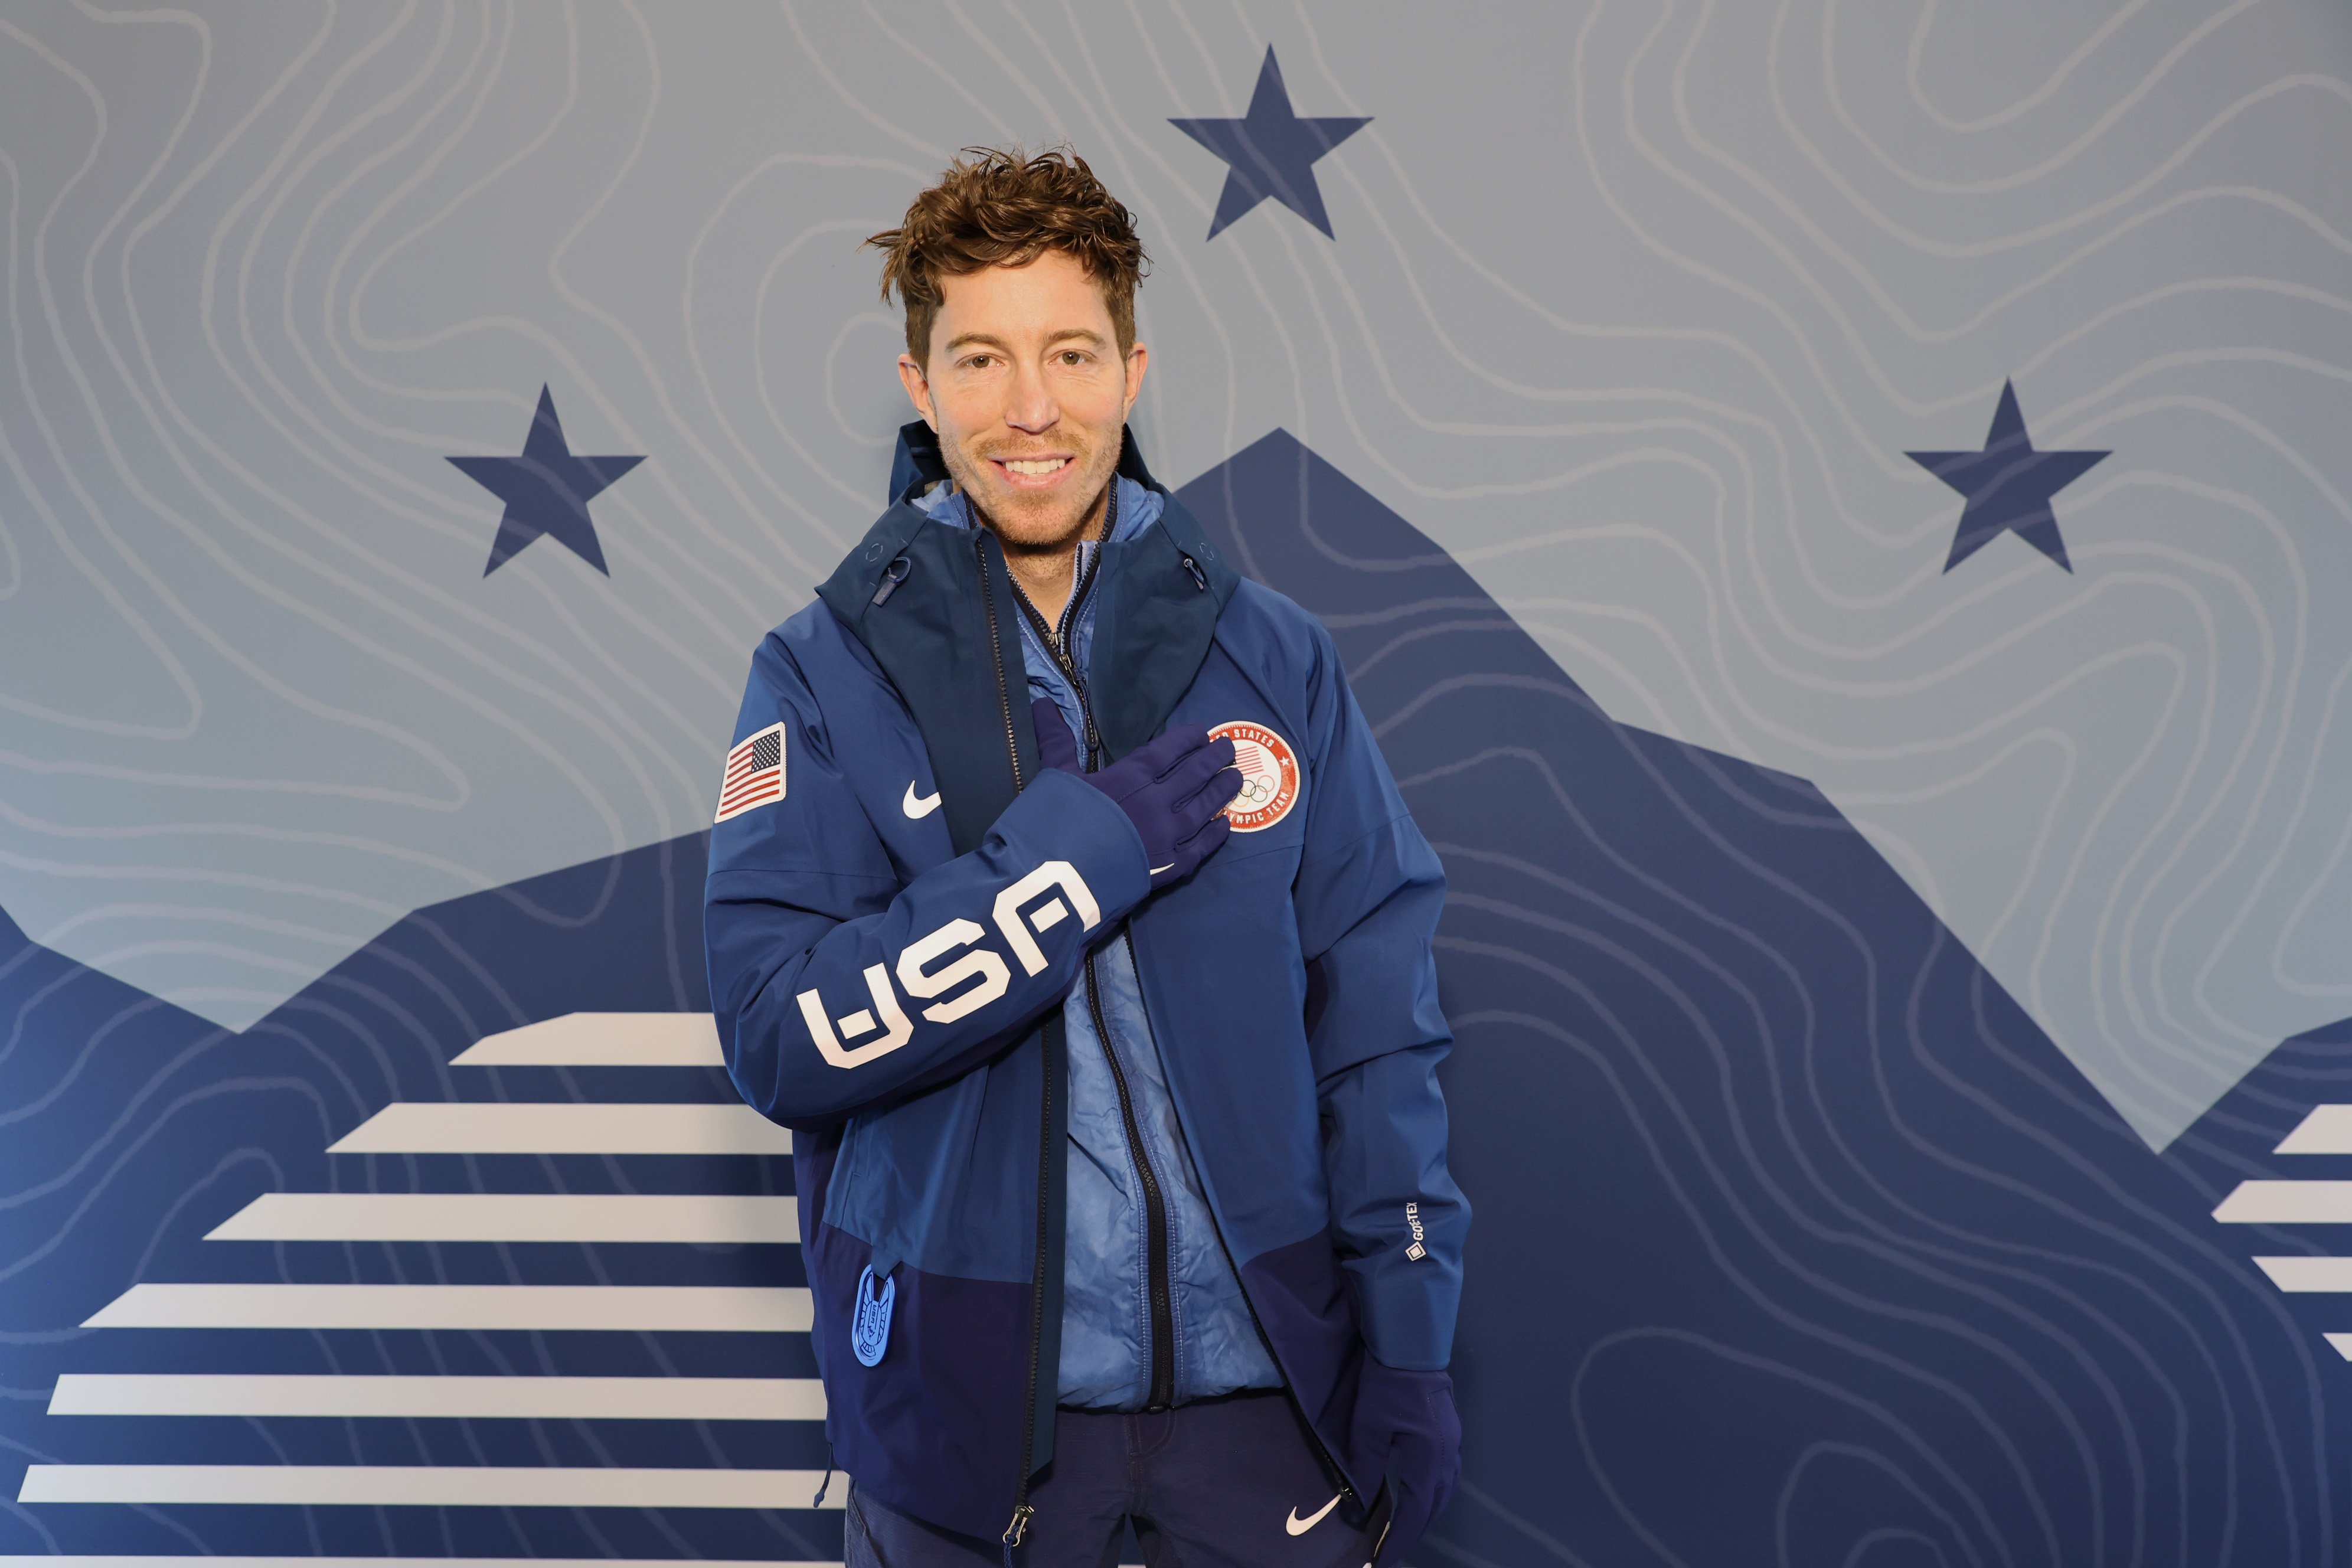 How Old Is Shaun White and Who Is He Dating?